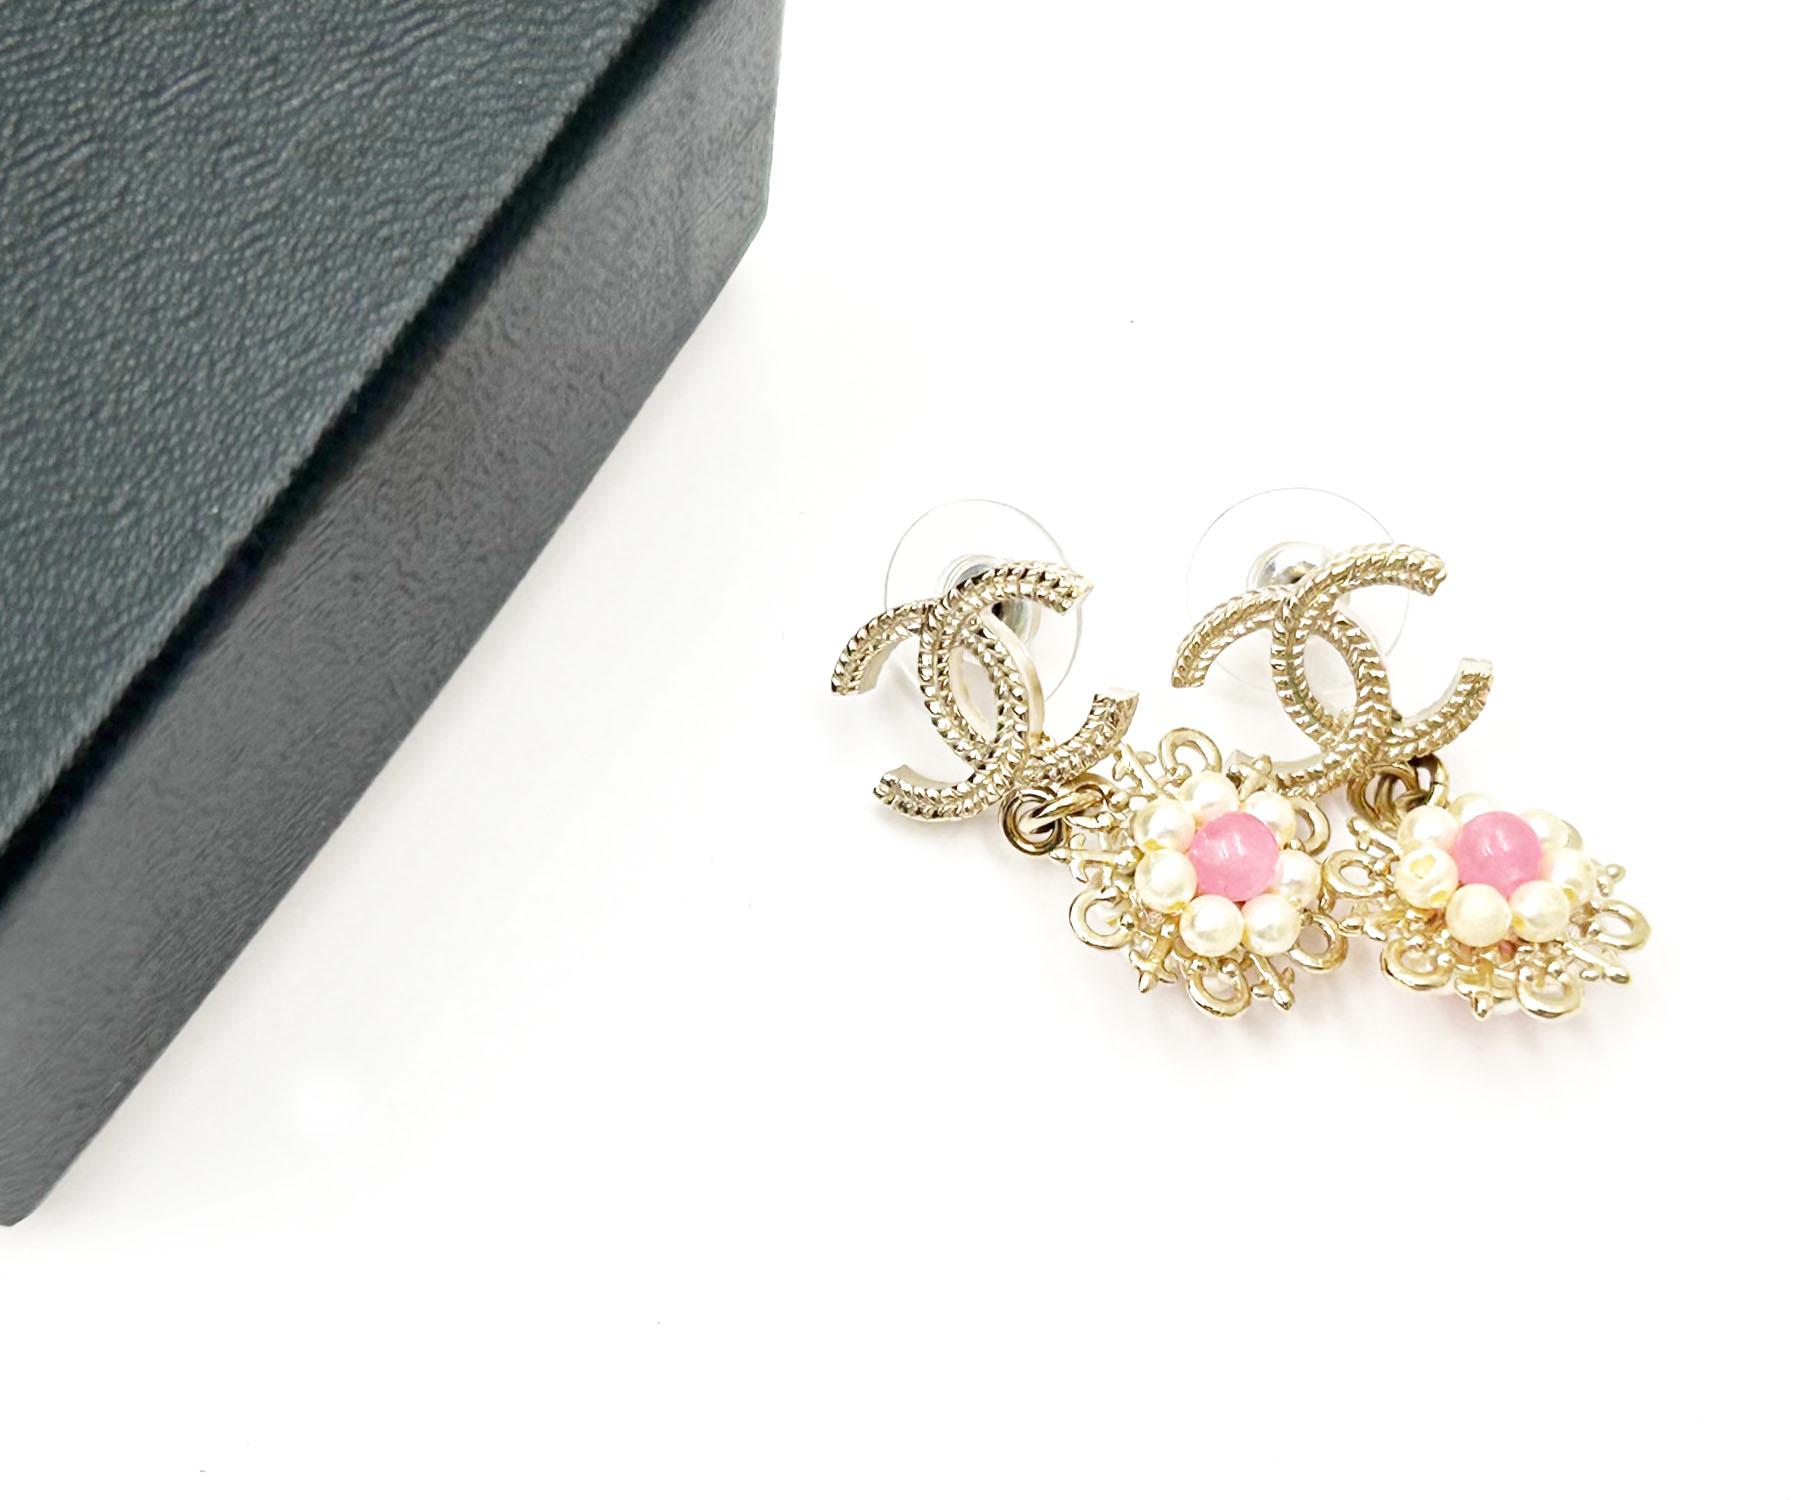 chanel earrings made in italy